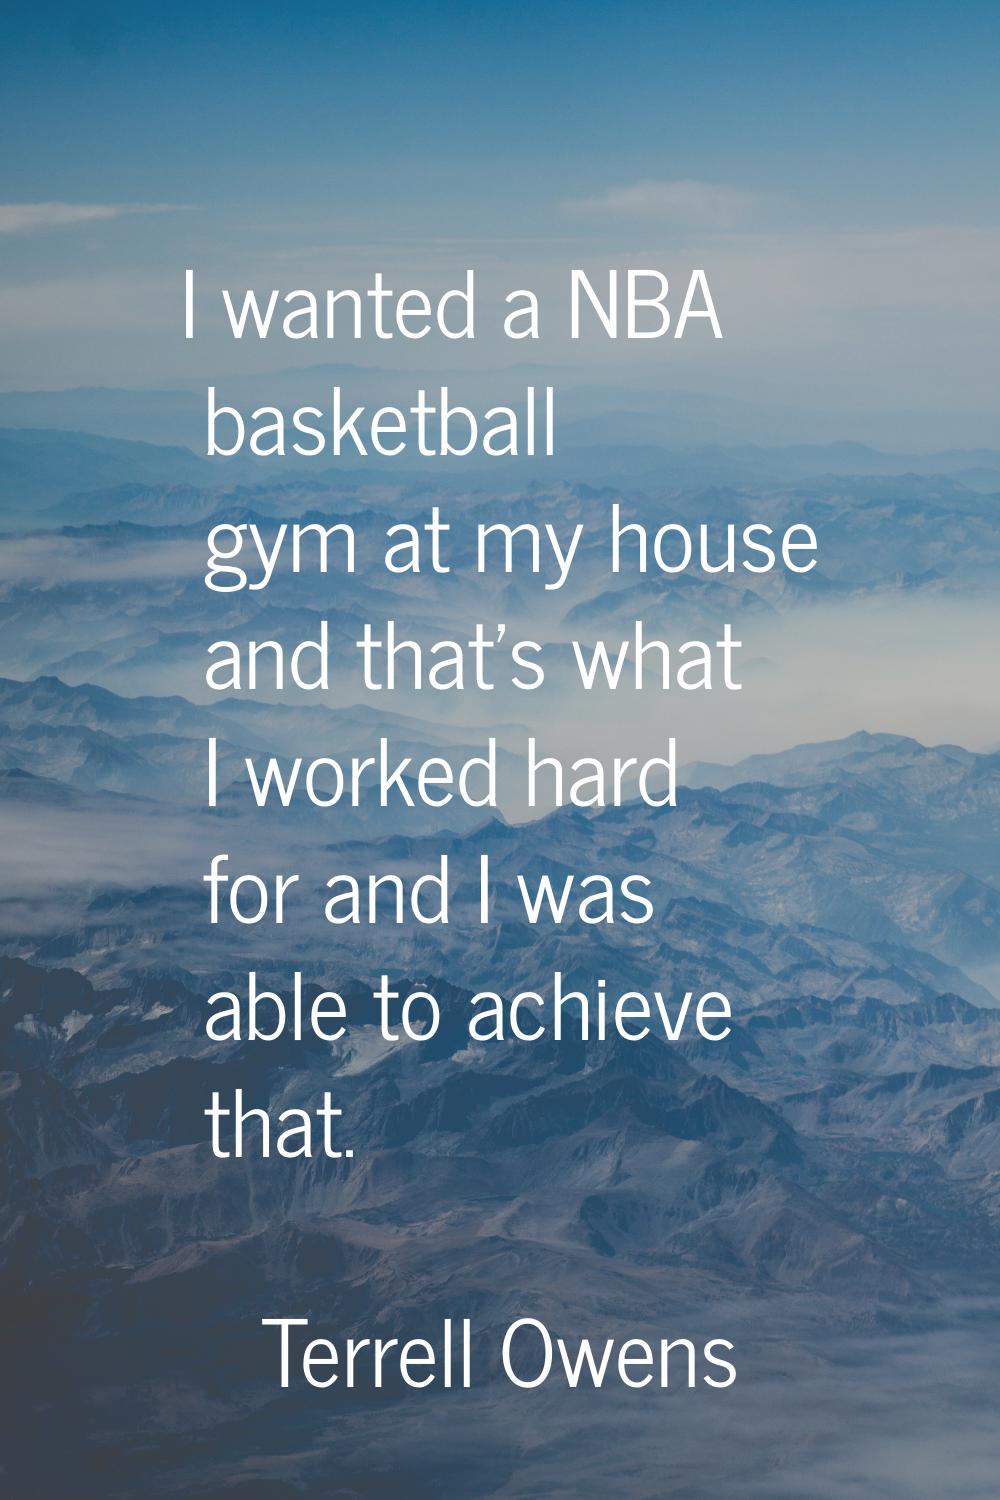 I wanted a NBA basketball gym at my house and that's what I worked hard for and I was able to achie